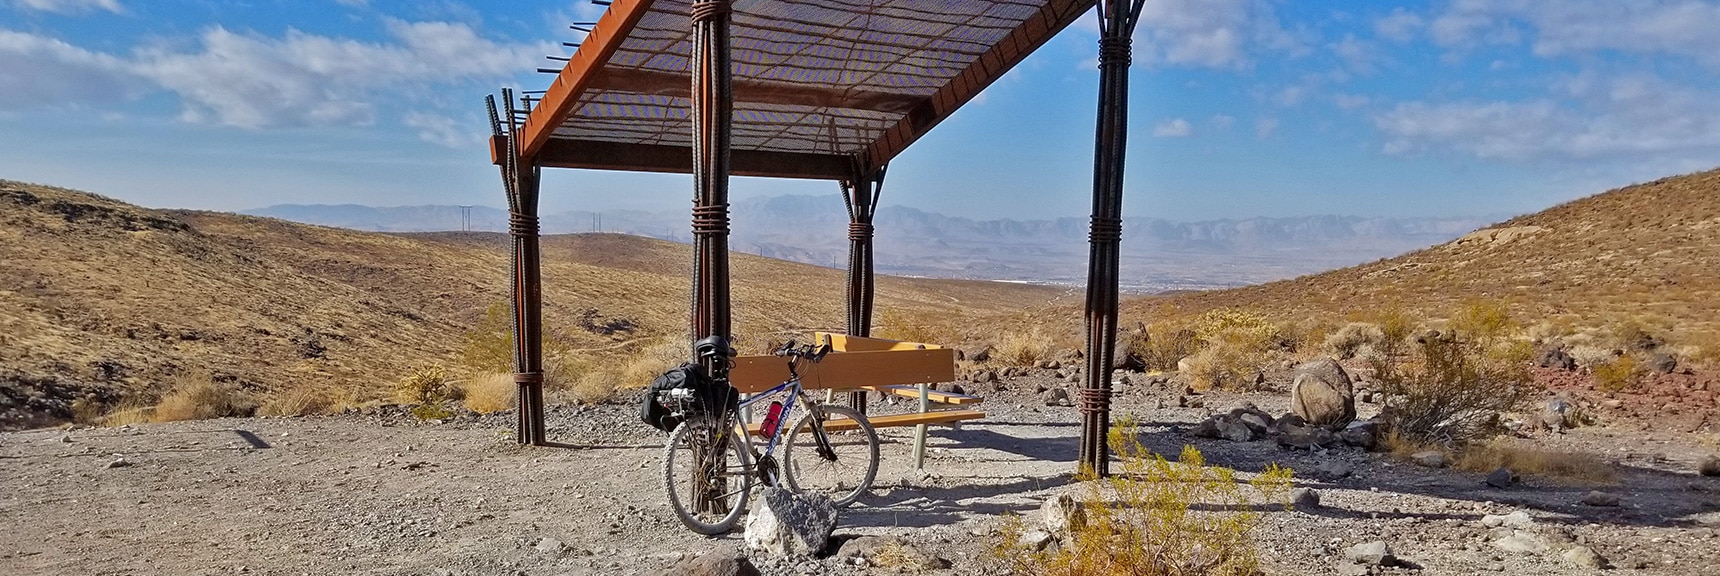 One of a Few Shelters Along the Trail | McCullough Hills Trail in Sloan Canyon National Conservation Area, Nevada